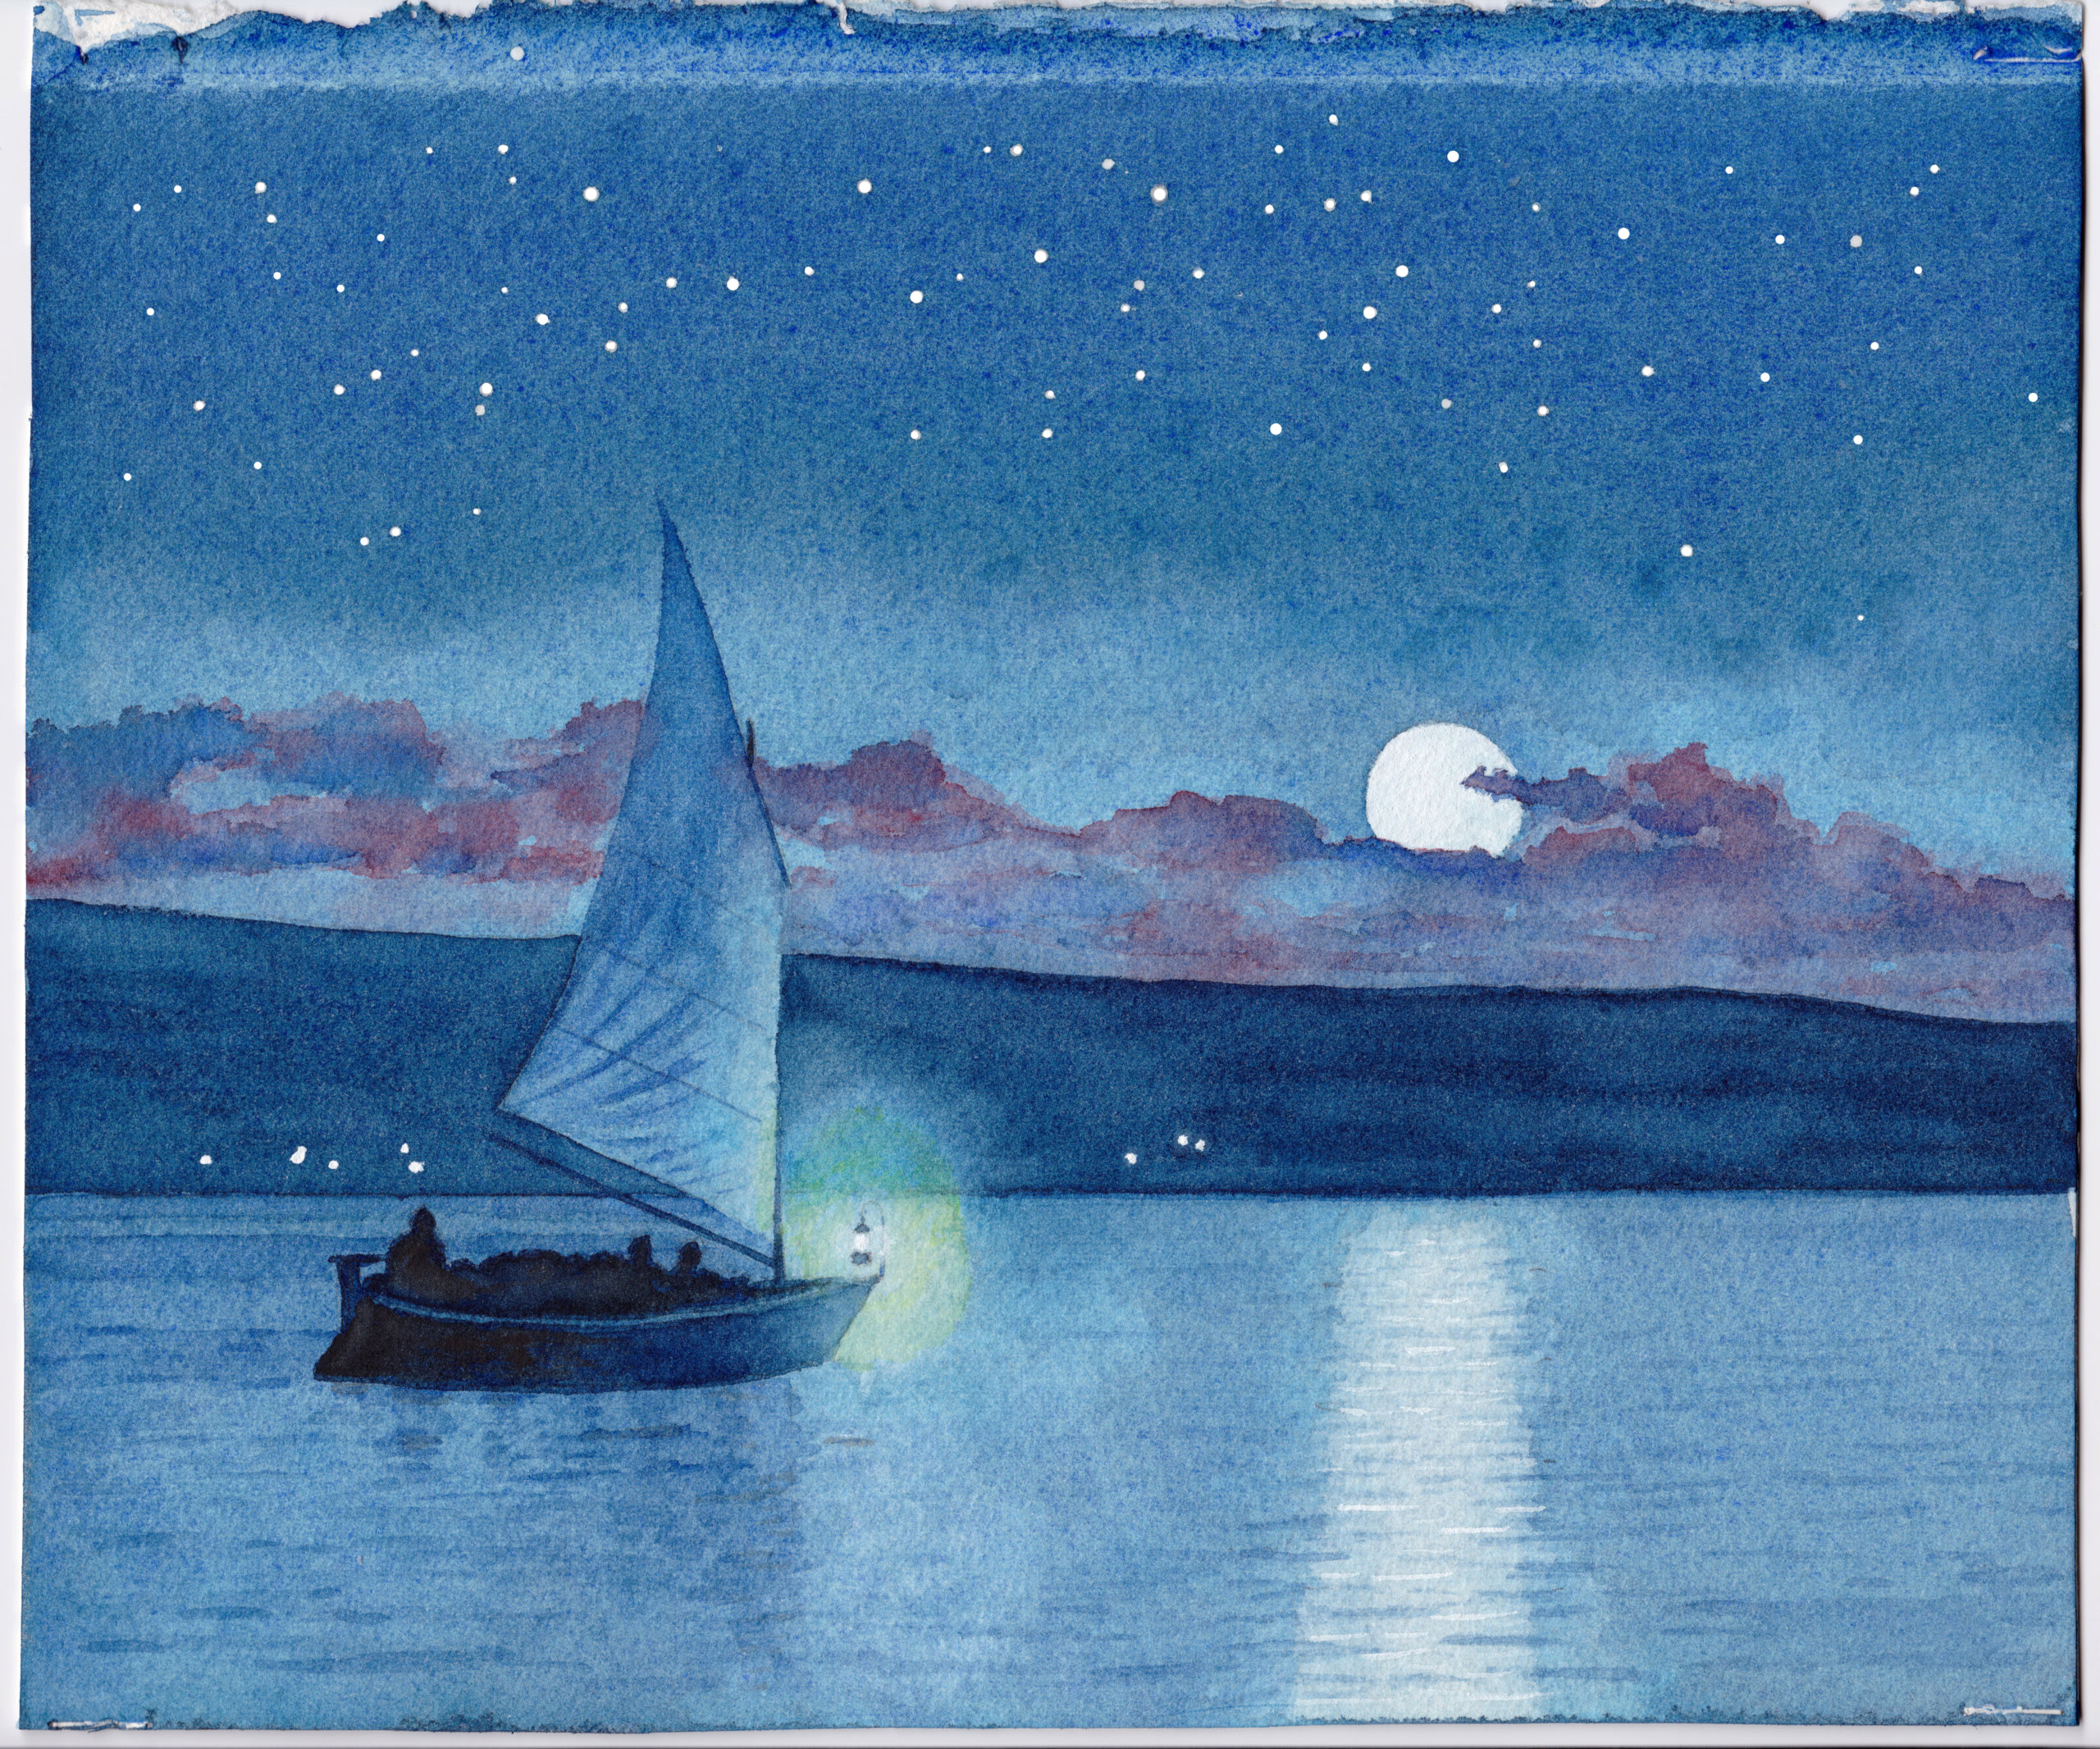 "Night Sailors" by Lisa Claisse